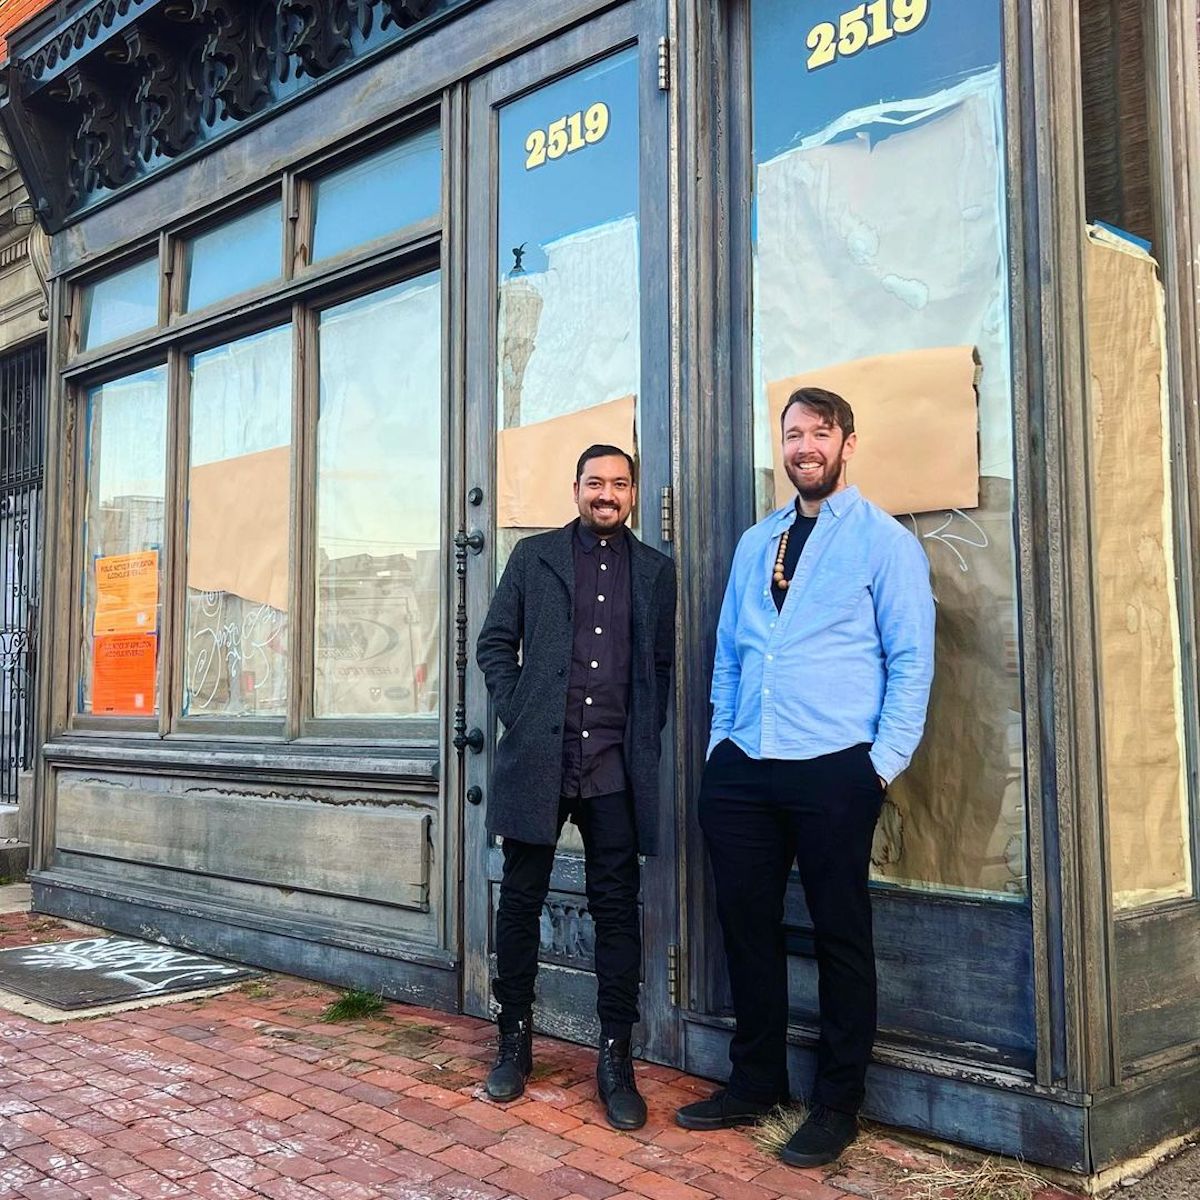 Post Haste to Host Pop-Up Preview at Philadelphia Distilling Ahead of Grand Opening